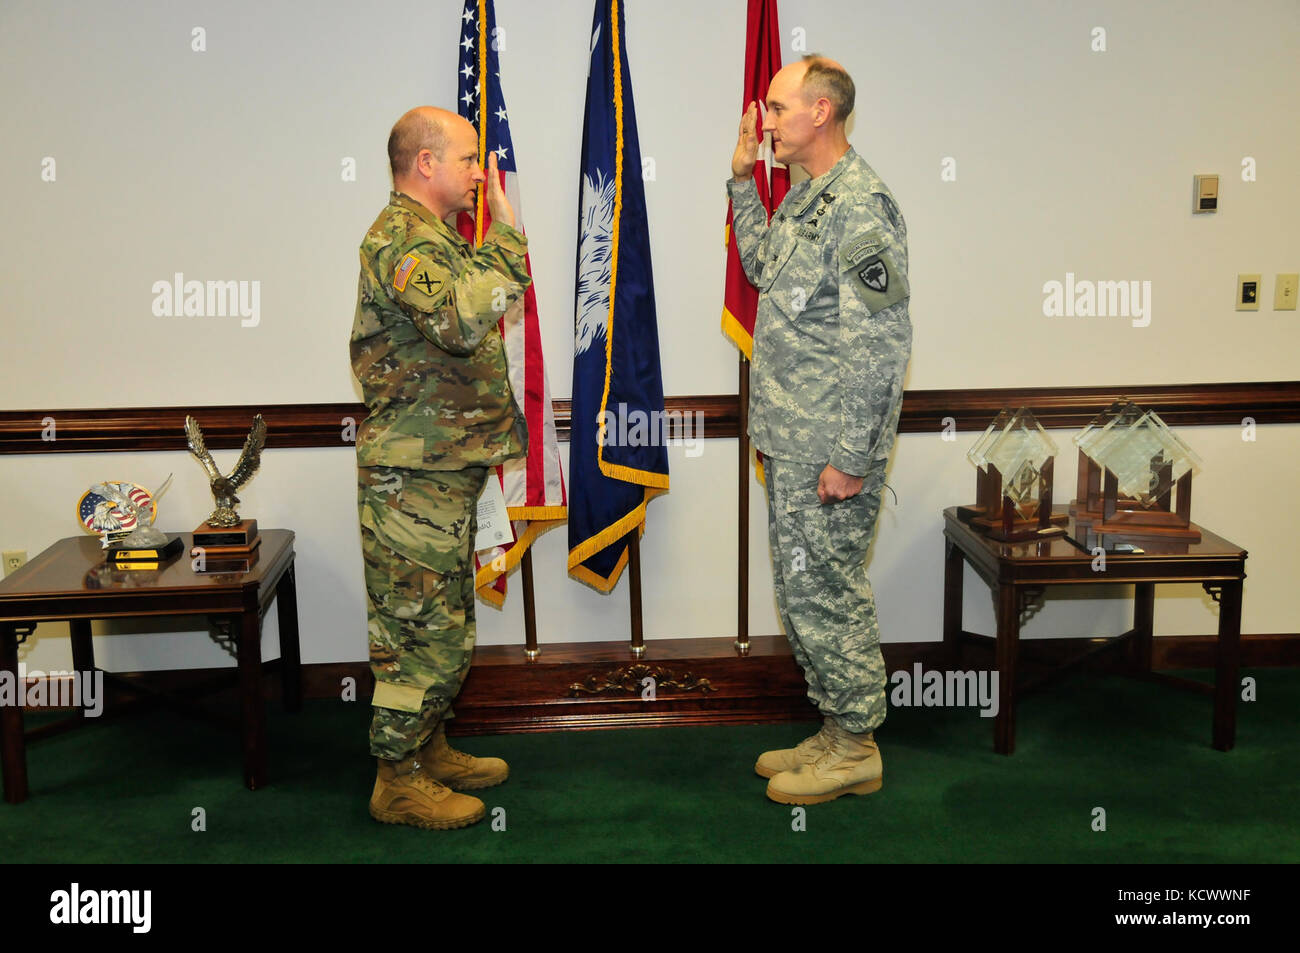 U.S. Army Maj. Gen. Robert R. Livingston, Jr. Adjutant General for South Carolina swears in U.S.Army Col. Barry G. Jones as the new Inspector General for South Carolina at the Ajutant Generals Complex Columbia S.c.,  April 7, 2016. Jones was most recently an instructor at the Air War College at Maxwell Air Force Base. (U.S. Army National Guard Photo by 2nd Lt. Tracci Dorgan-Bandy/Released) Stock Photo